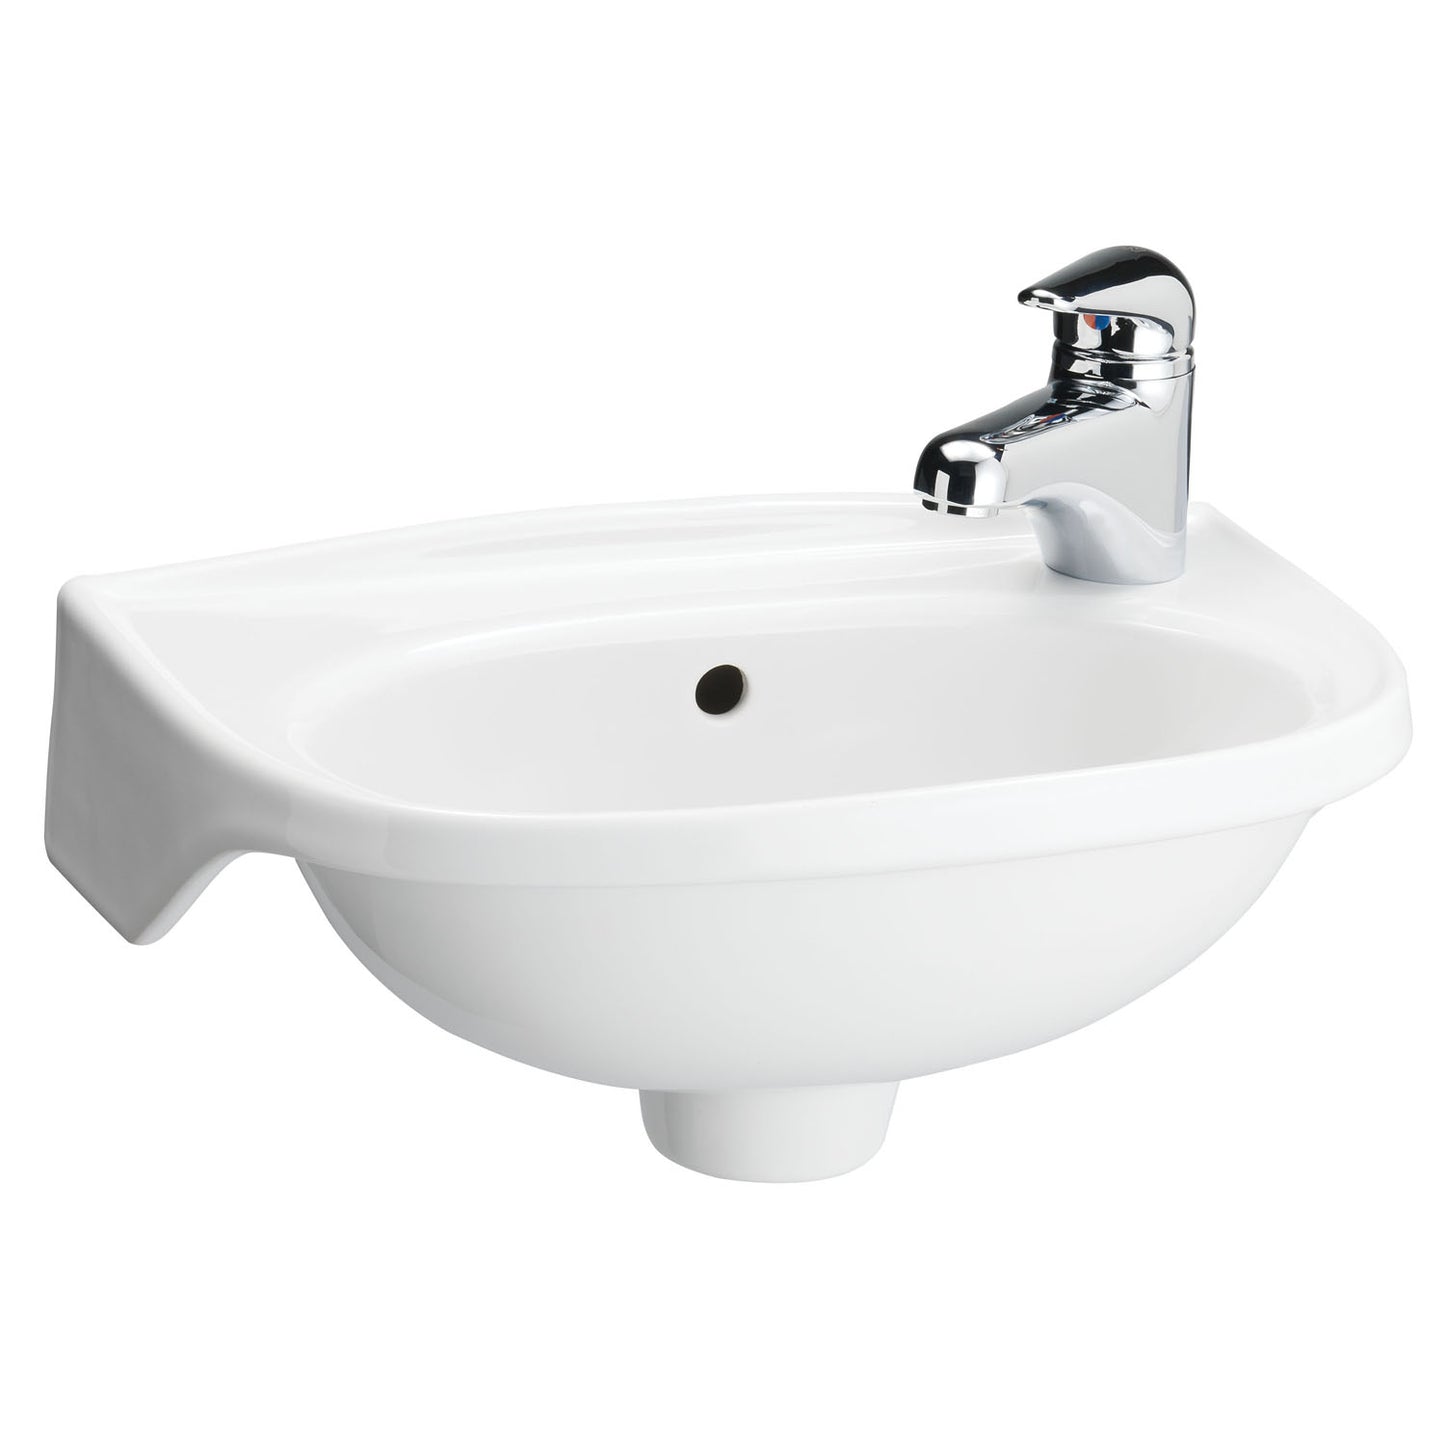 Tina Wall Hung Sink in White for Right-Hand Faucet